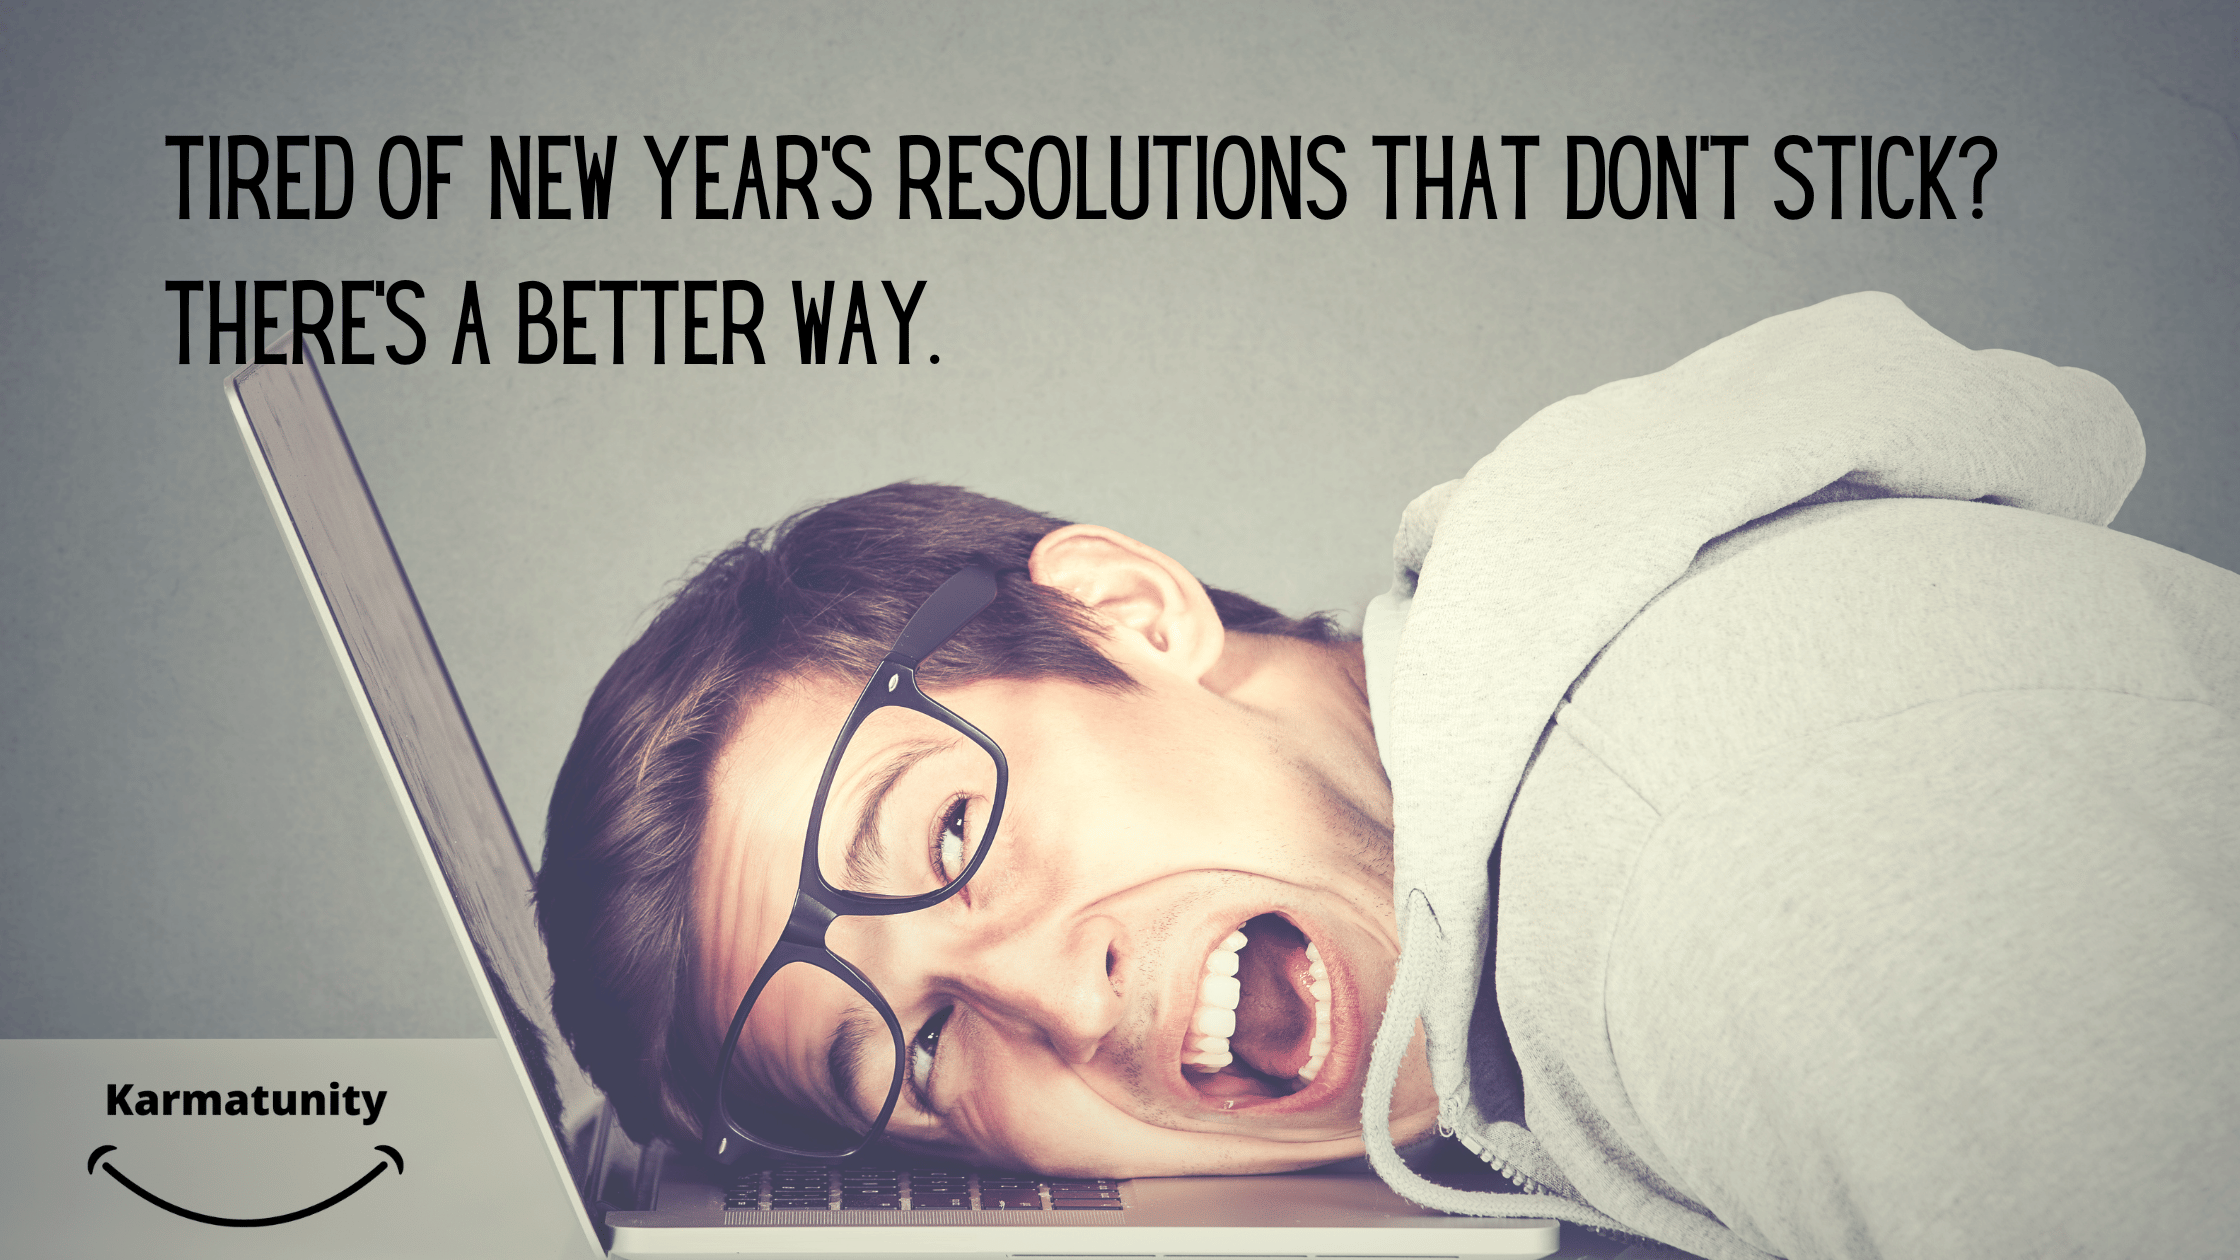 Tired of New Year’s resolutions that don’t stick? There’s a better way.